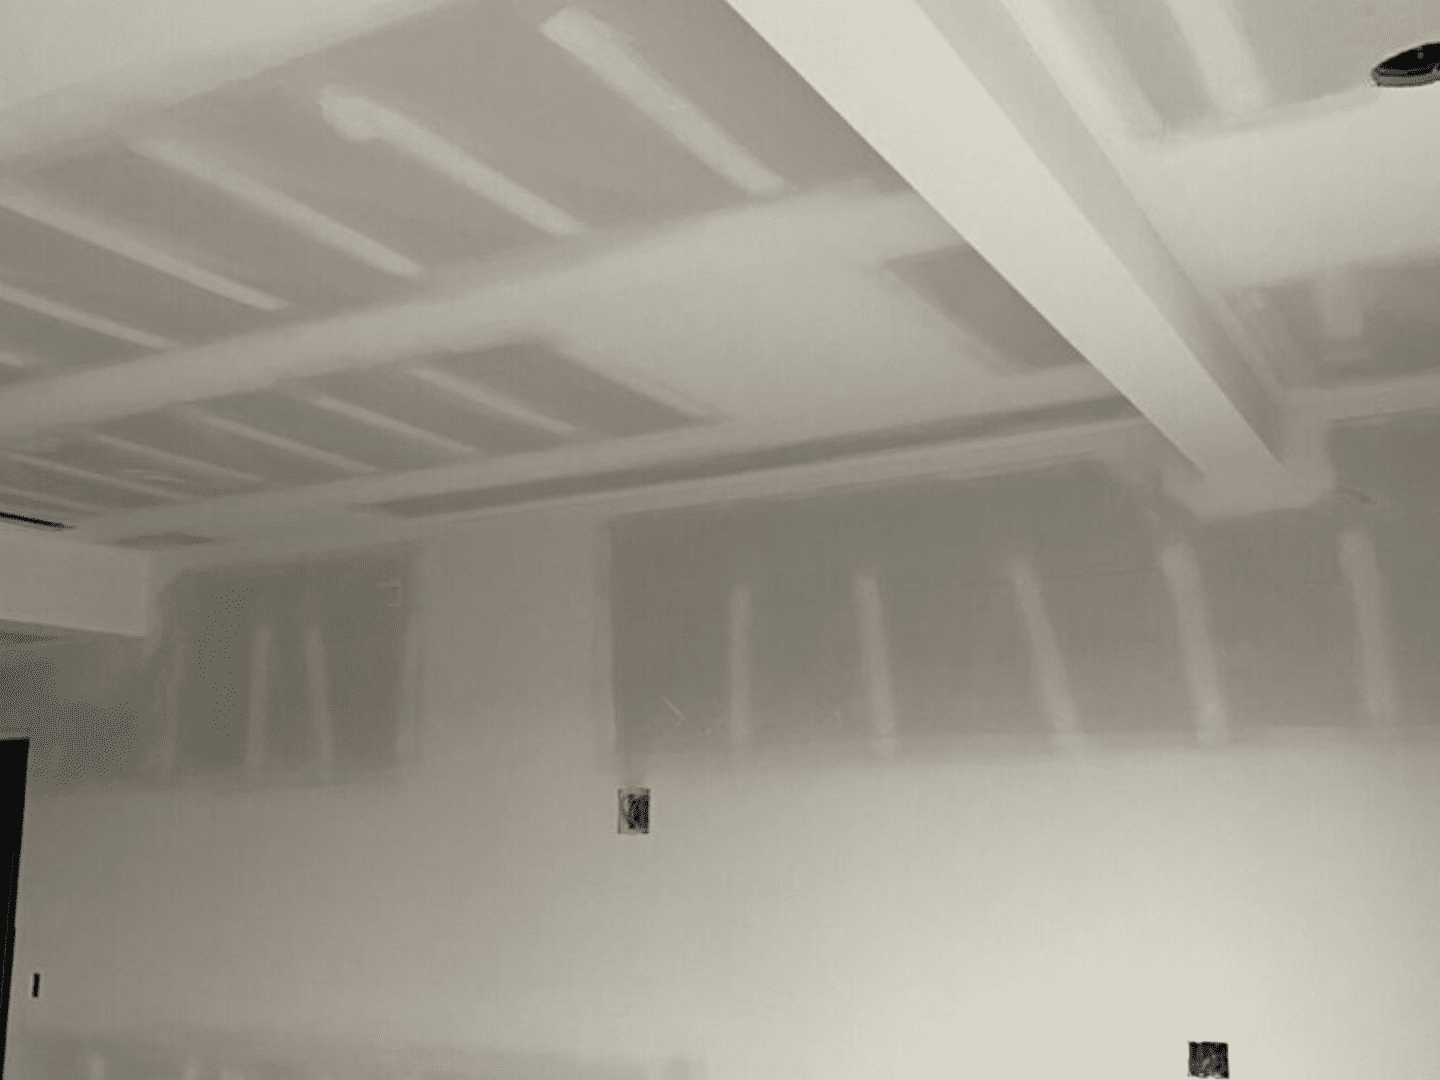 A room with many white walls and ceiling.